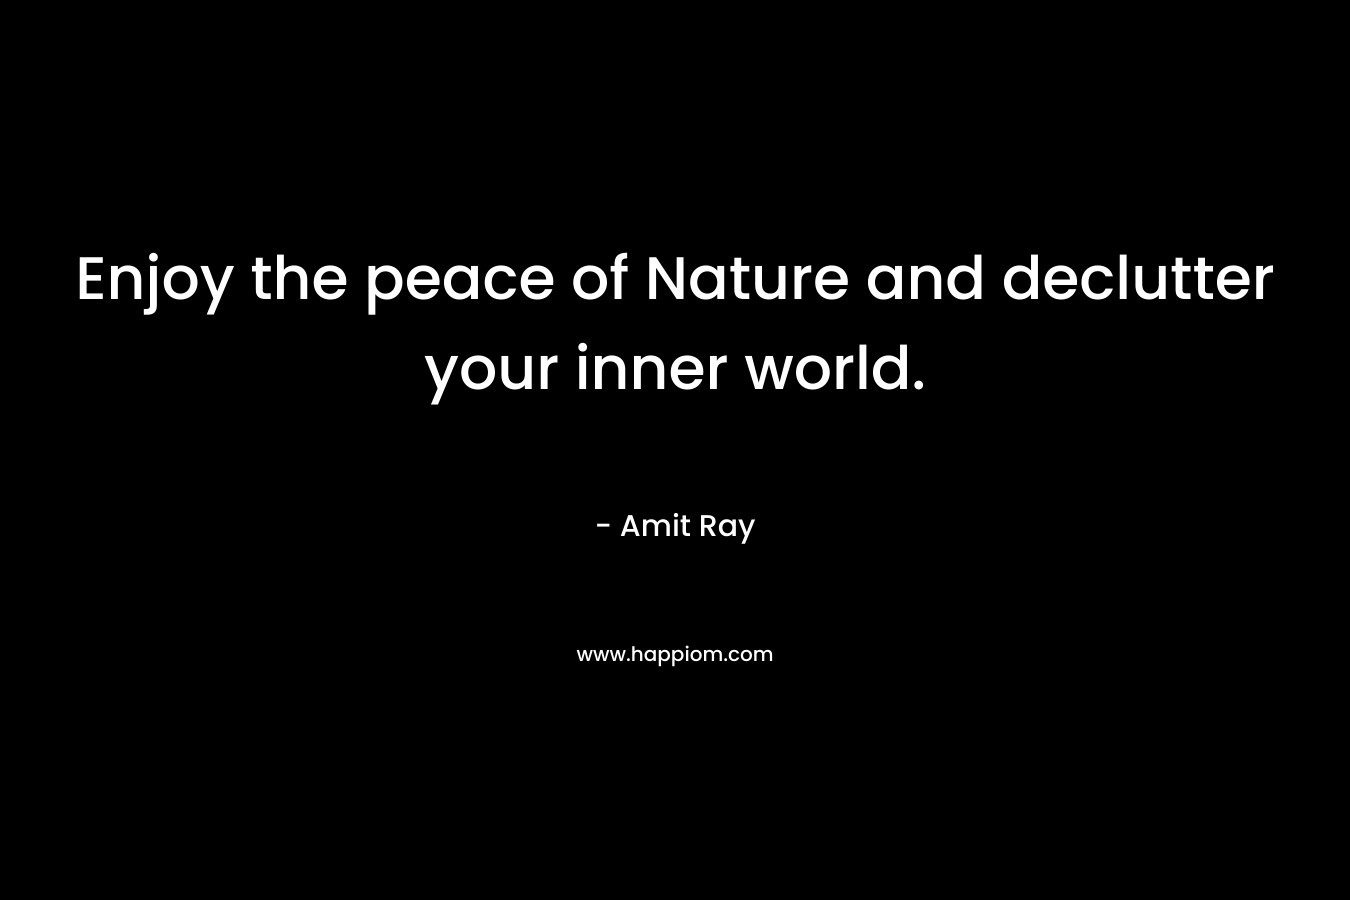 Enjoy the peace of Nature and declutter your inner world.